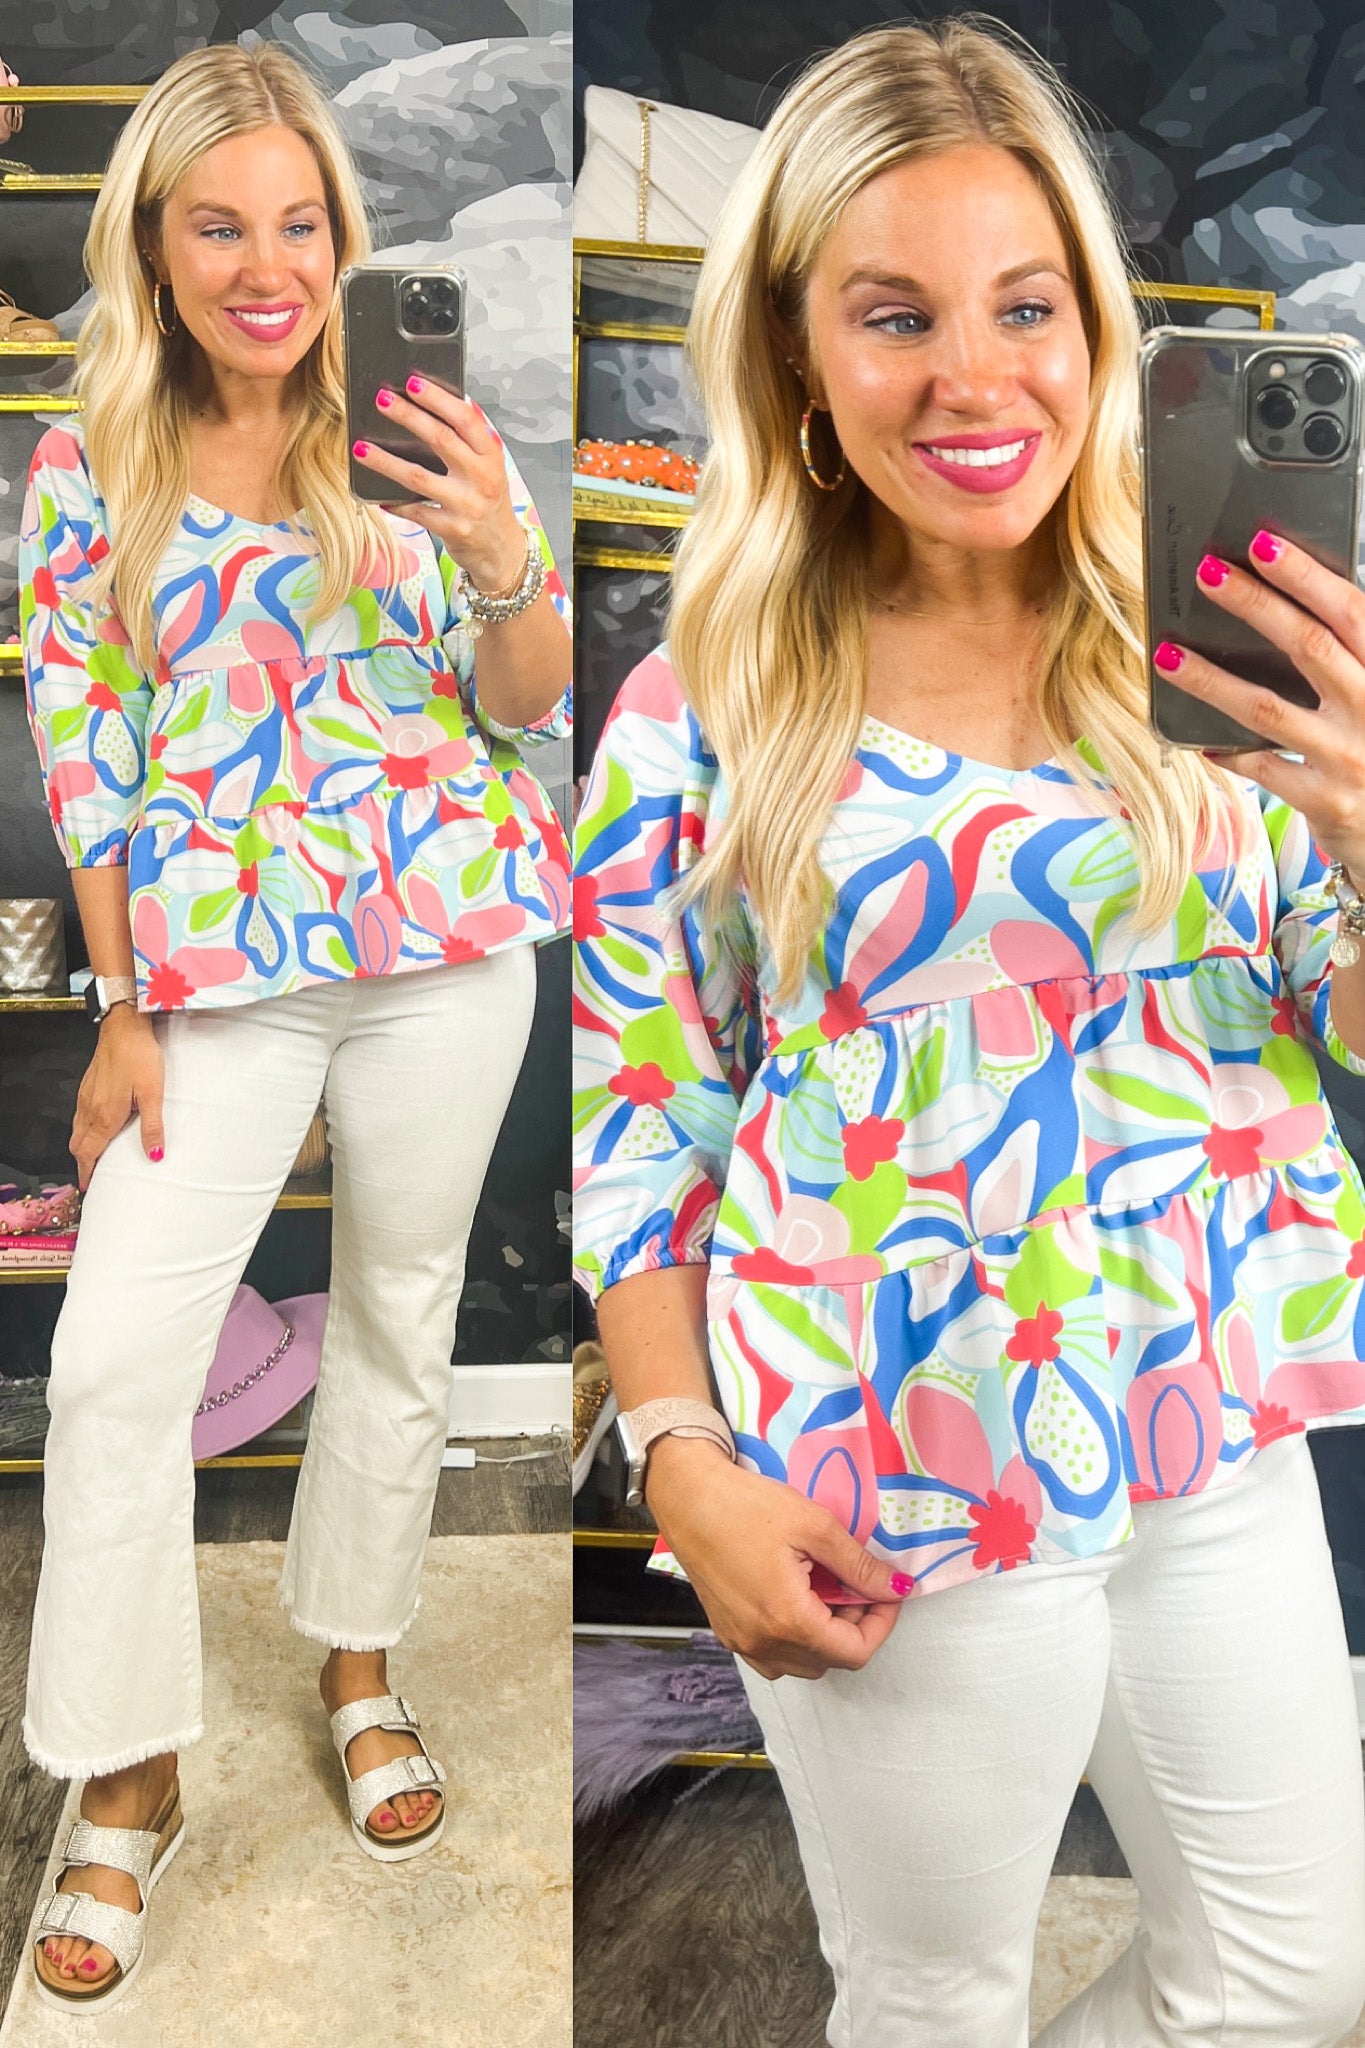 The Sophia Top in Color Me Happy by Michelle McDowell